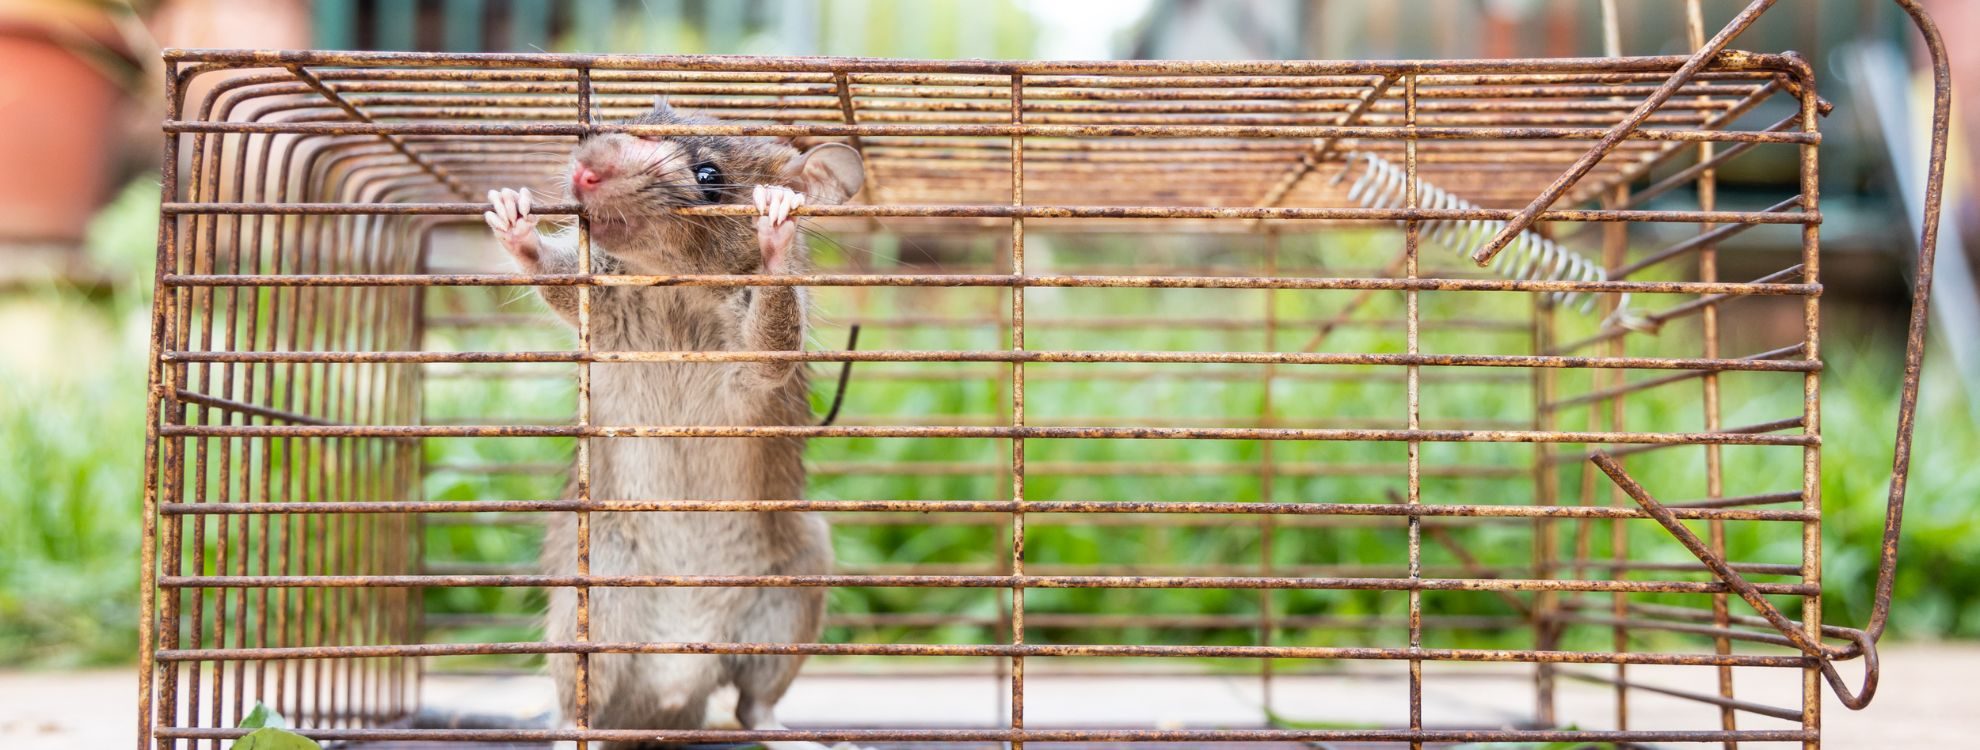 rodent trapped in a cage for rodent control